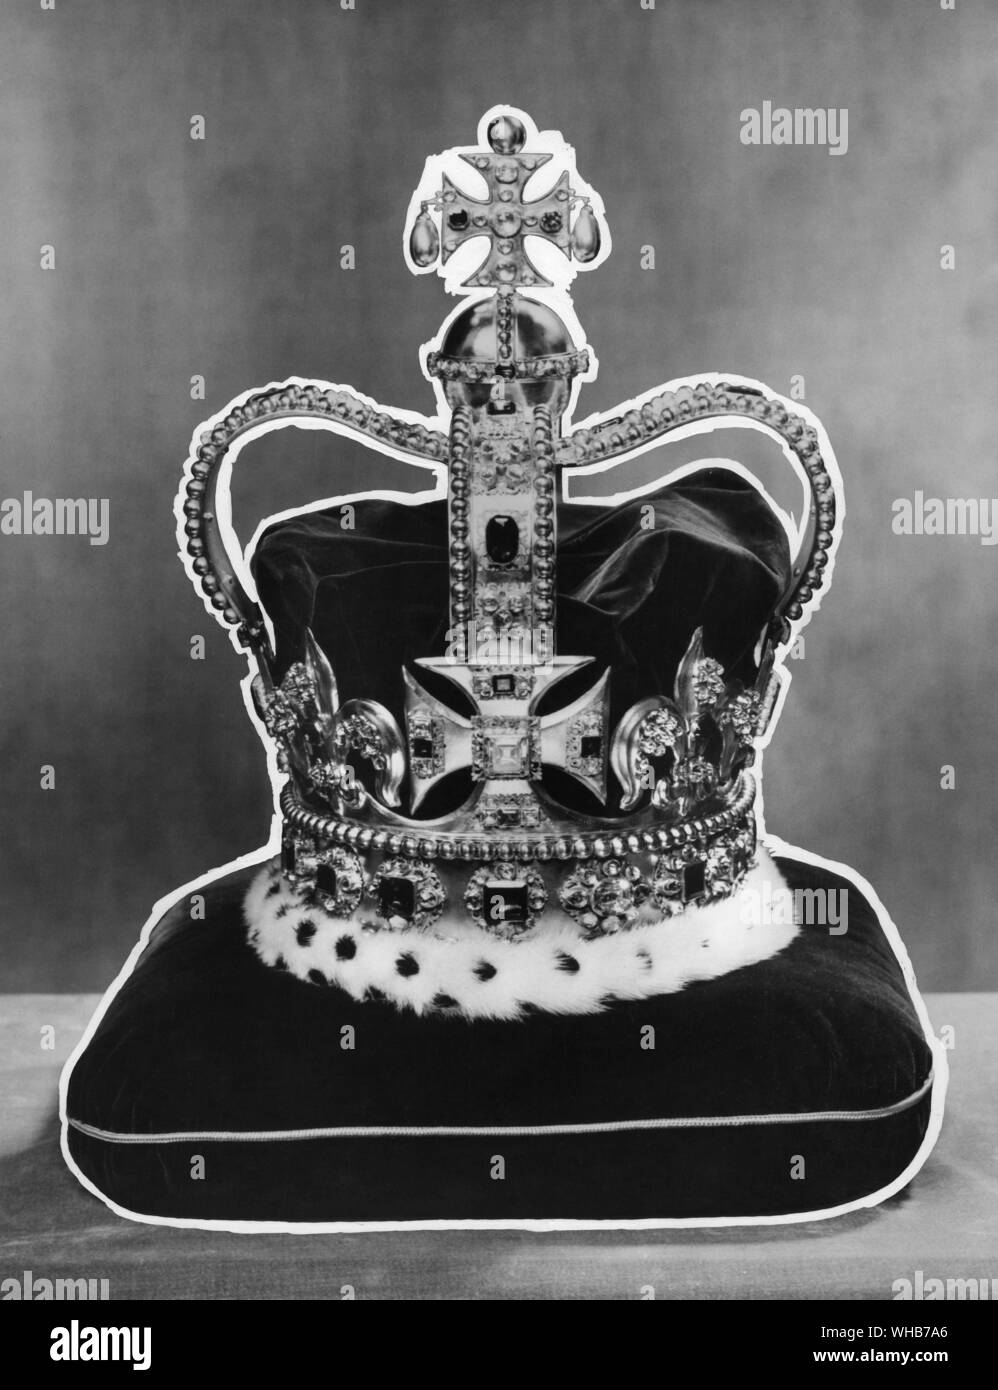 The Crown of England copied in the time of Charles II from the anicient crown worn by Edward the Confessor and used at the coronation of every monarch since. . coronation crown of the kings and queens of England that consists of a gold- and jewel-encrusted base surmounted by a cross. Stock Photo